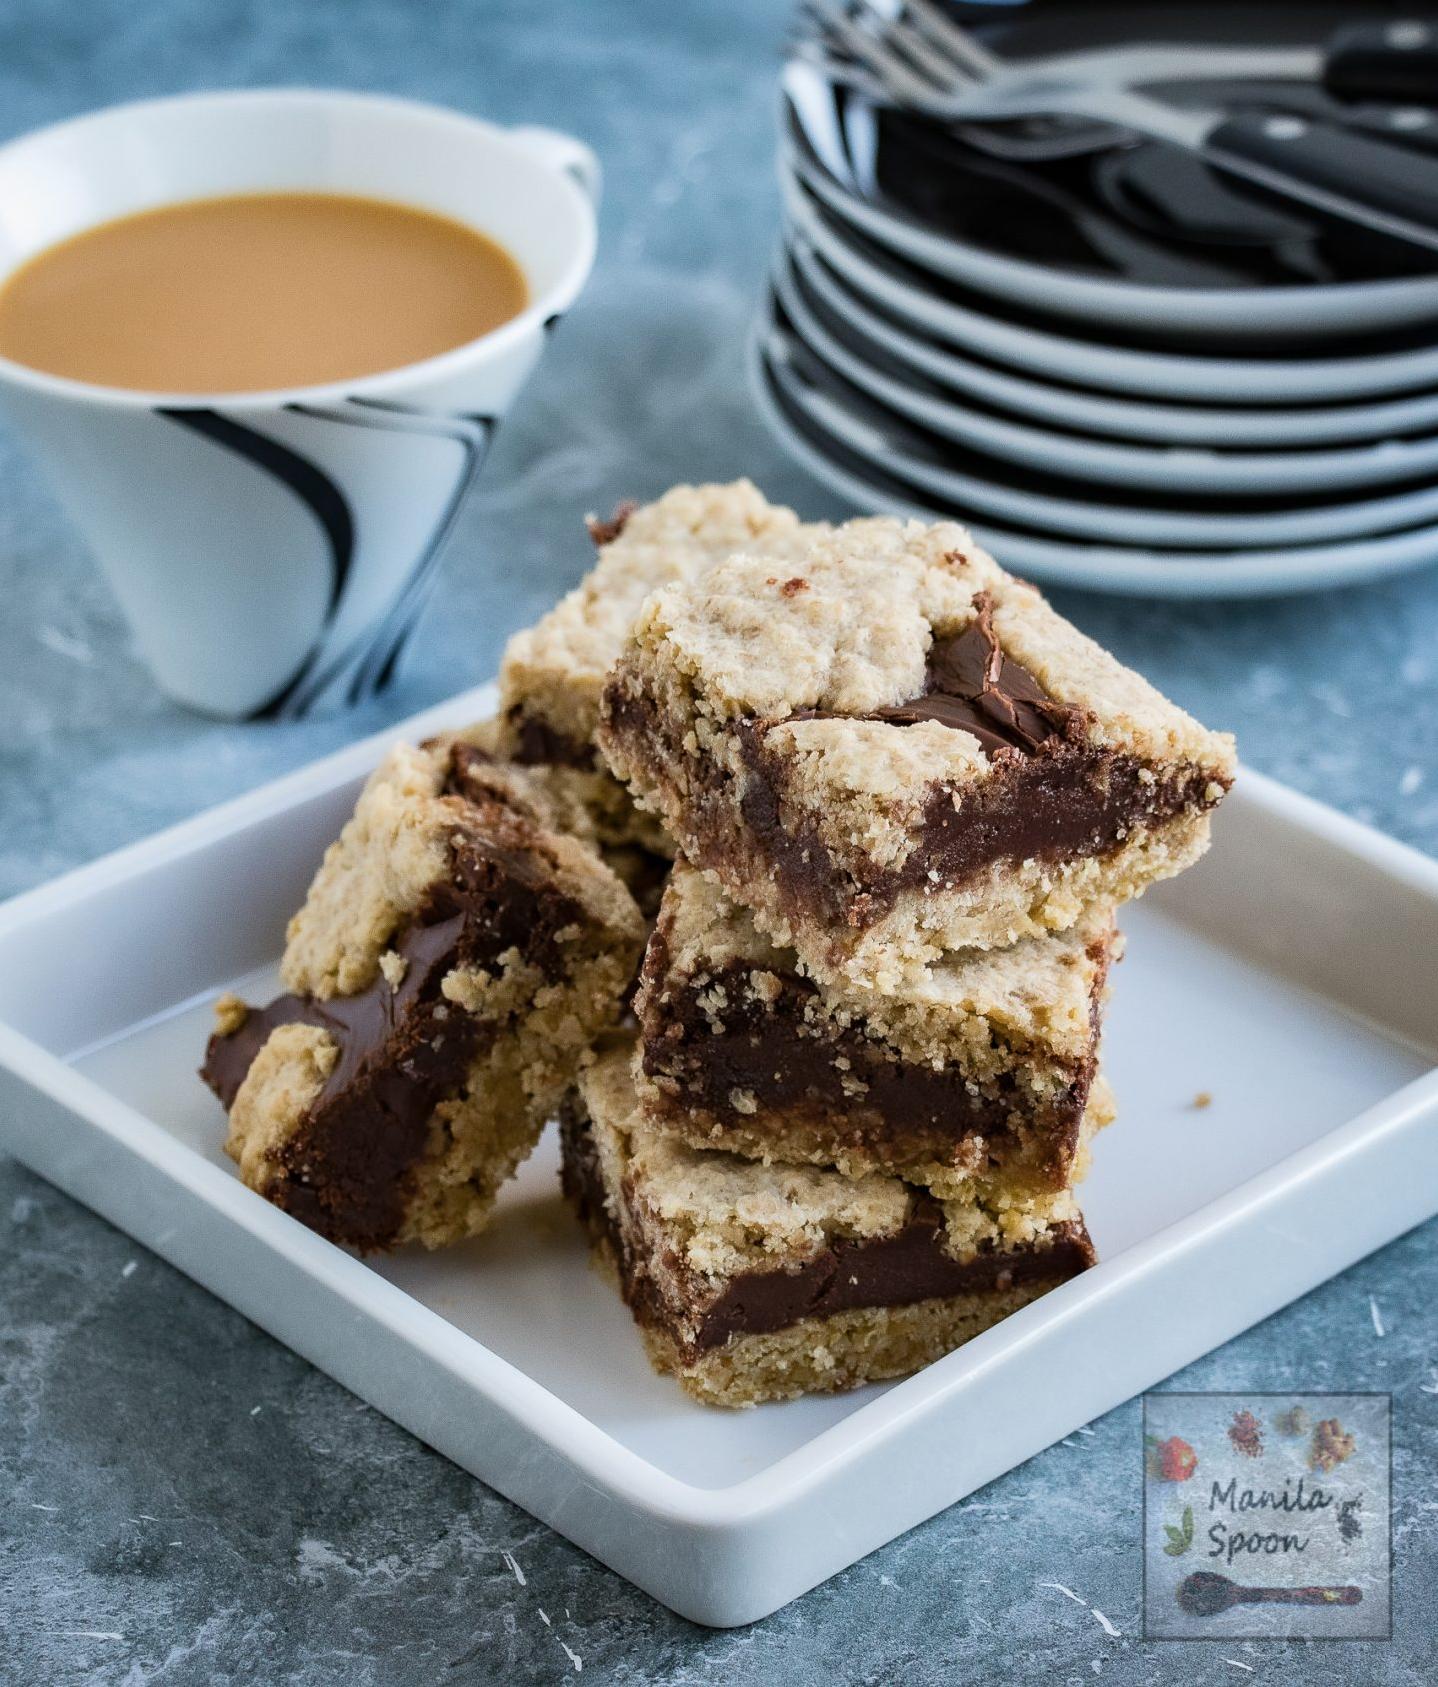  Bake these copycat Starbucks gluten-free fudge oat bars and treat yourself to a decadent snack.